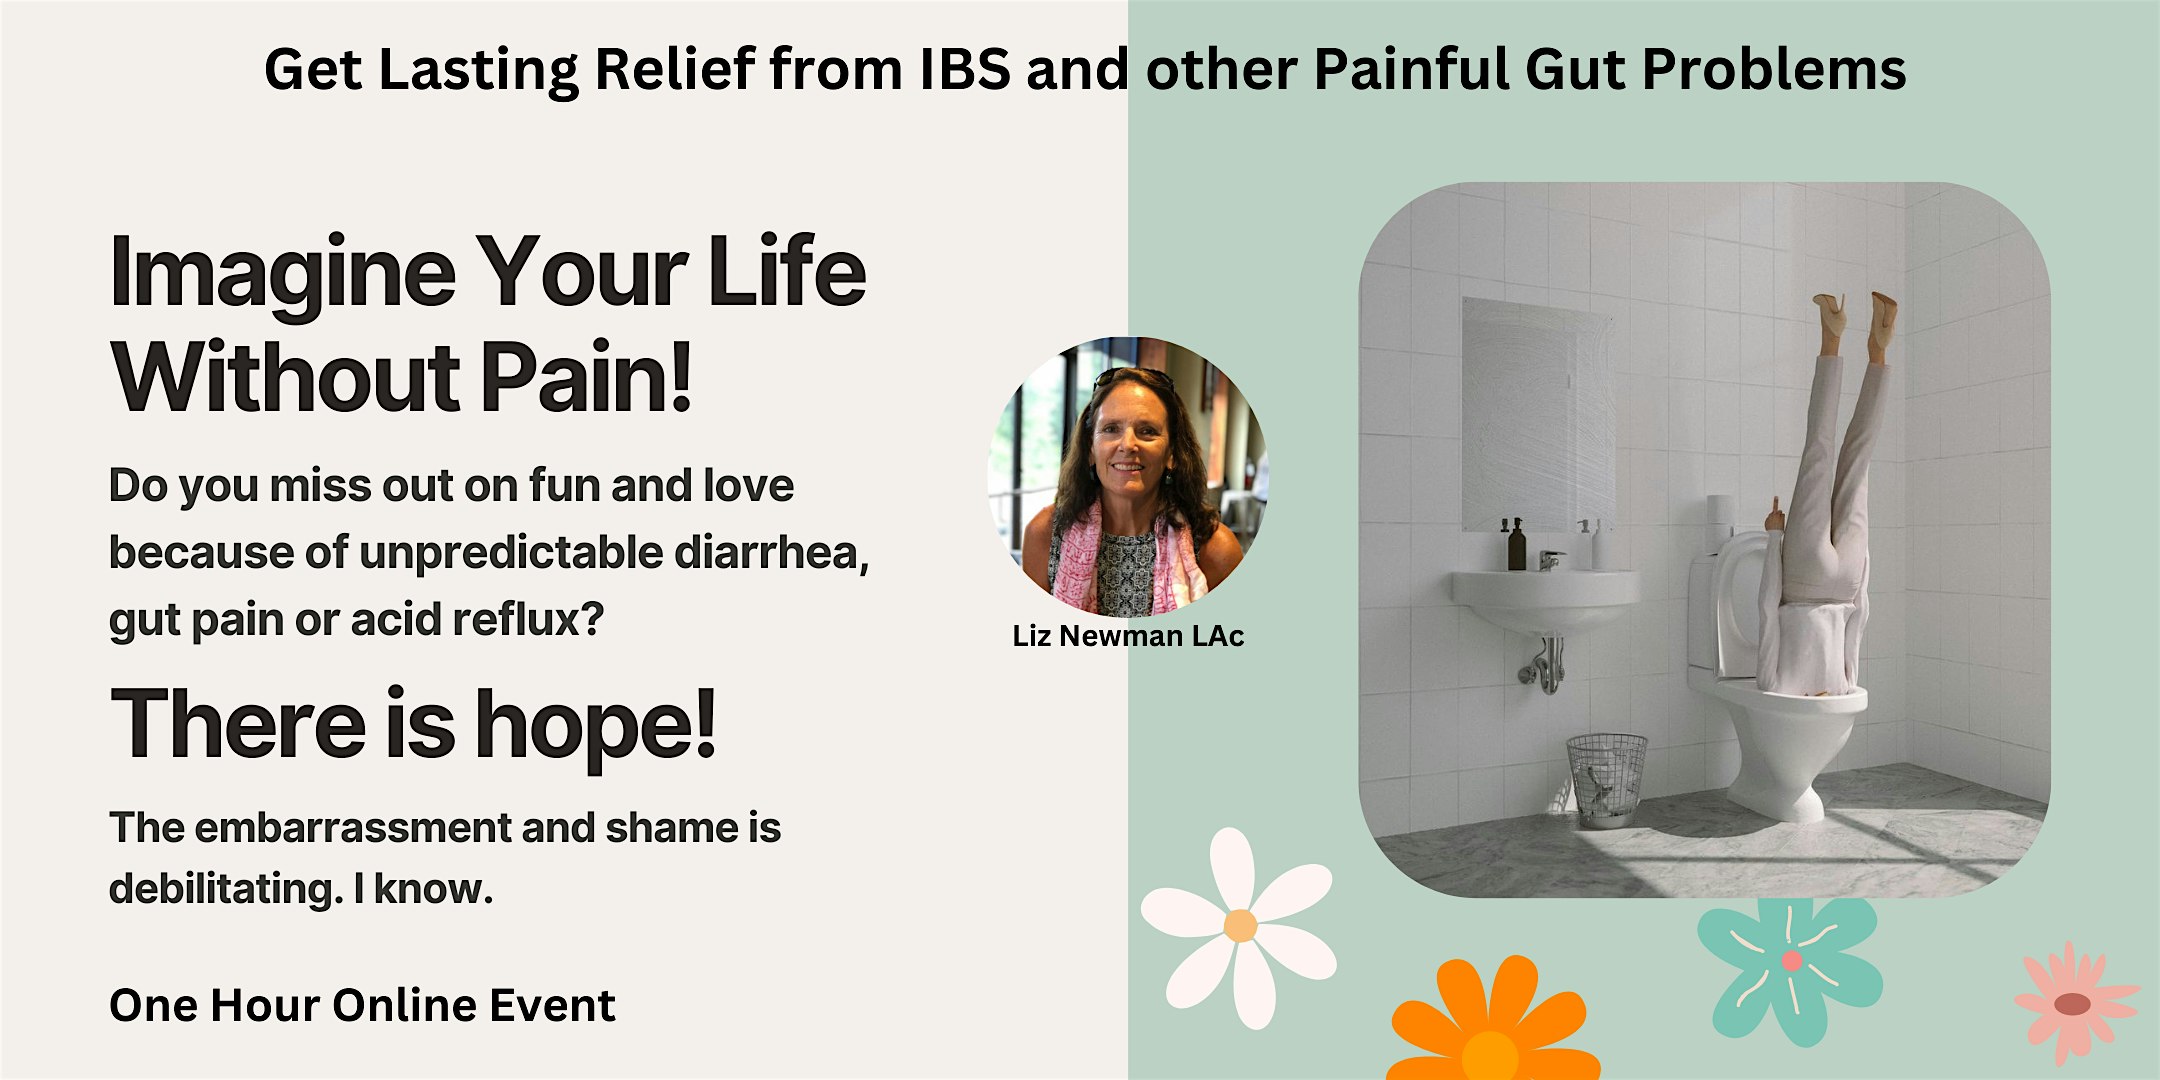 Get Lasting Relief from IBS and Painful Gut Problems - Saint Paul MN